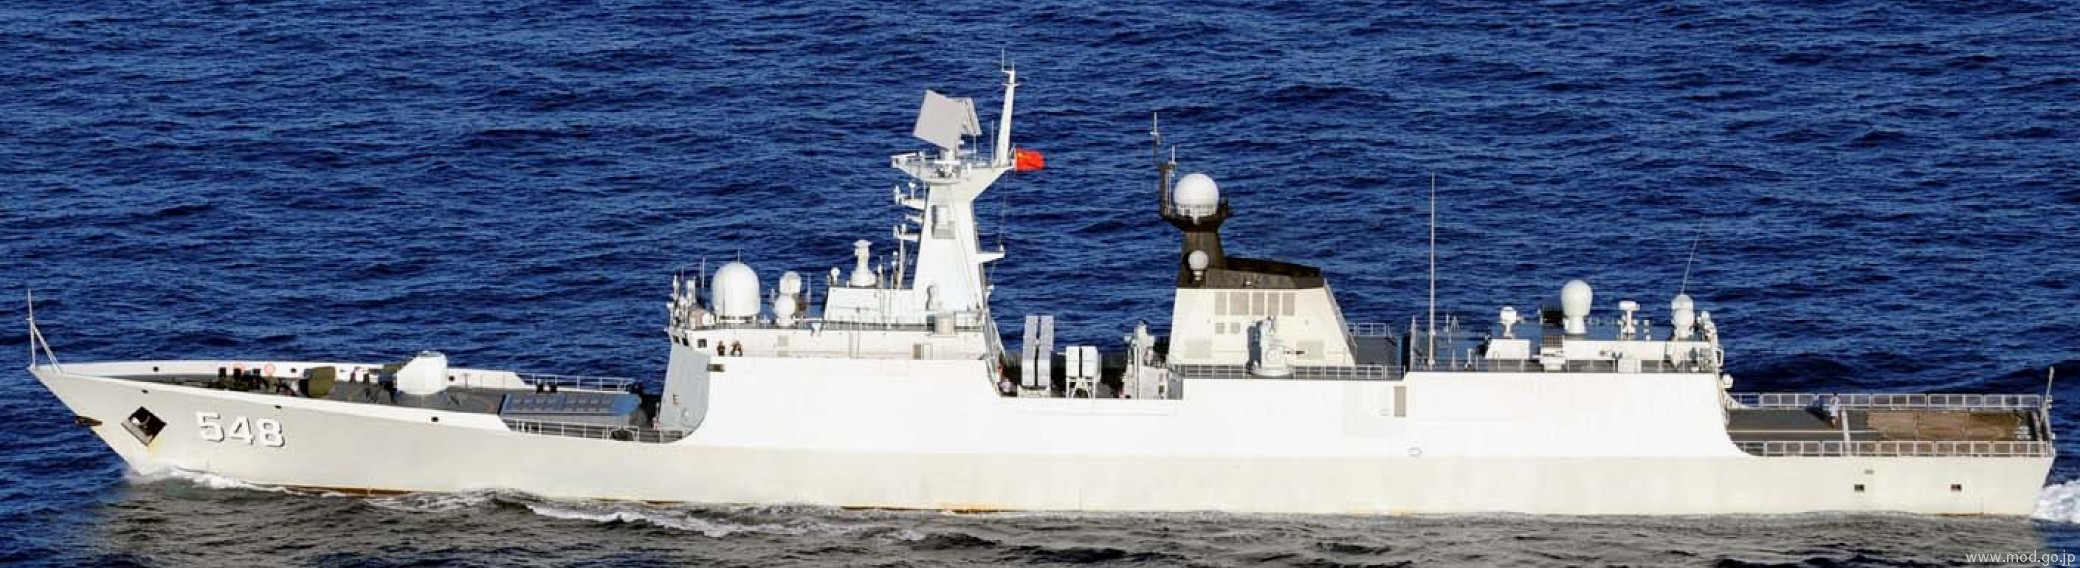 ffg-548 plans yiyang type 054a jiangkai ii class guided missile frigate china people's liberation army navy 04